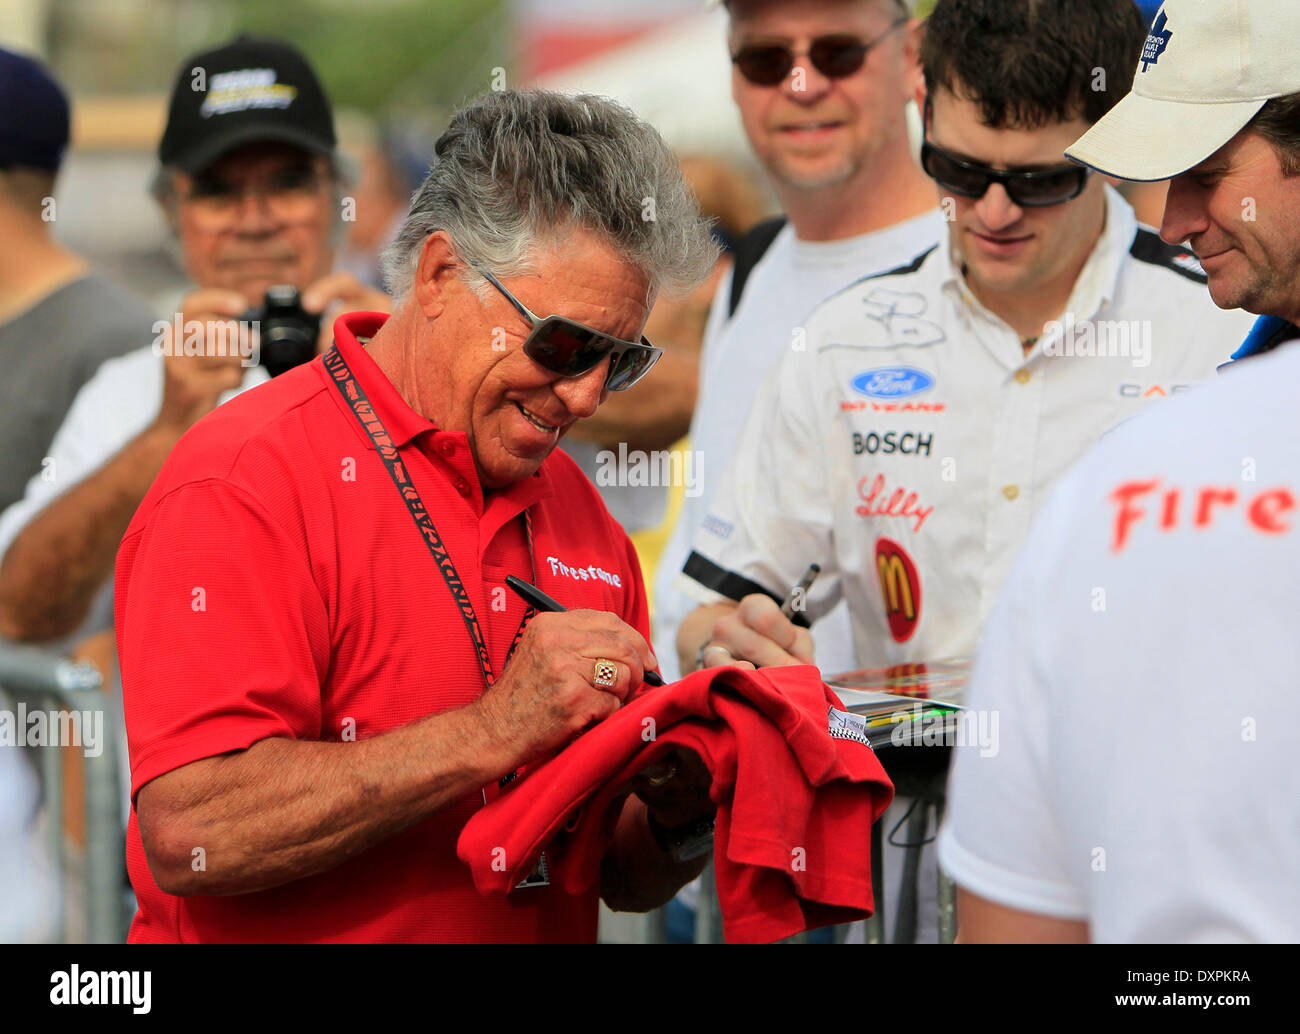 St. Petersburg, Florida, USA. 28th Mar, 2014. DIRK SHADD | Times .Mario Andretti stops to sign autographs while heading out to pit lane for a practice session during the Firestone Grand Prix of St. Petersburg on Friday. © Dirk Shadd/Tampa Bay Times/ZUMAPRESS.com/Alamy Live News Stock Photo